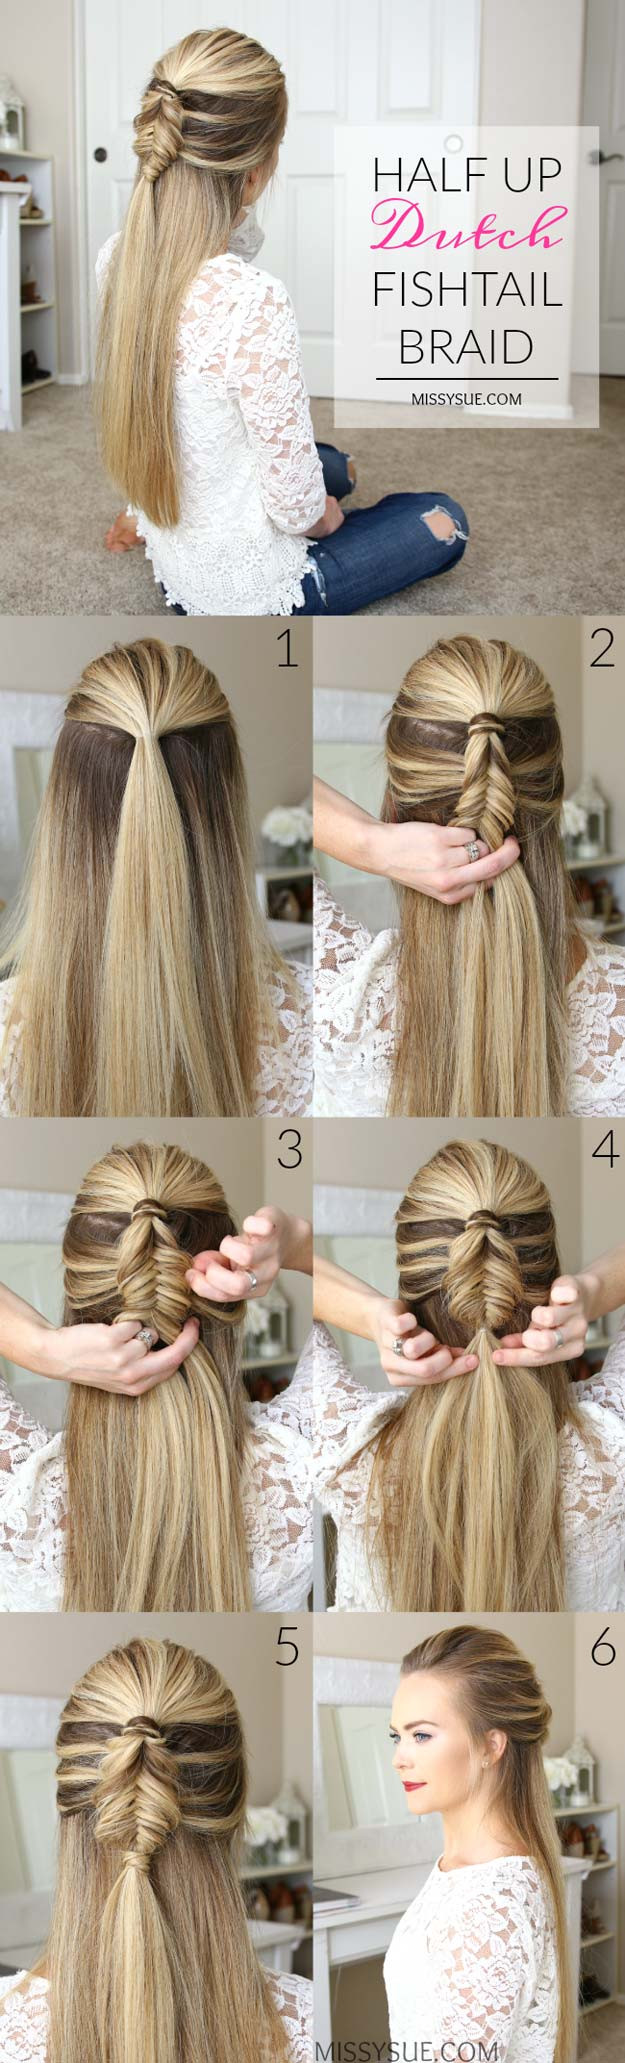 Cool Hairstyles Step By Step
 40 of the Best Cute Hair Braiding Tutorials